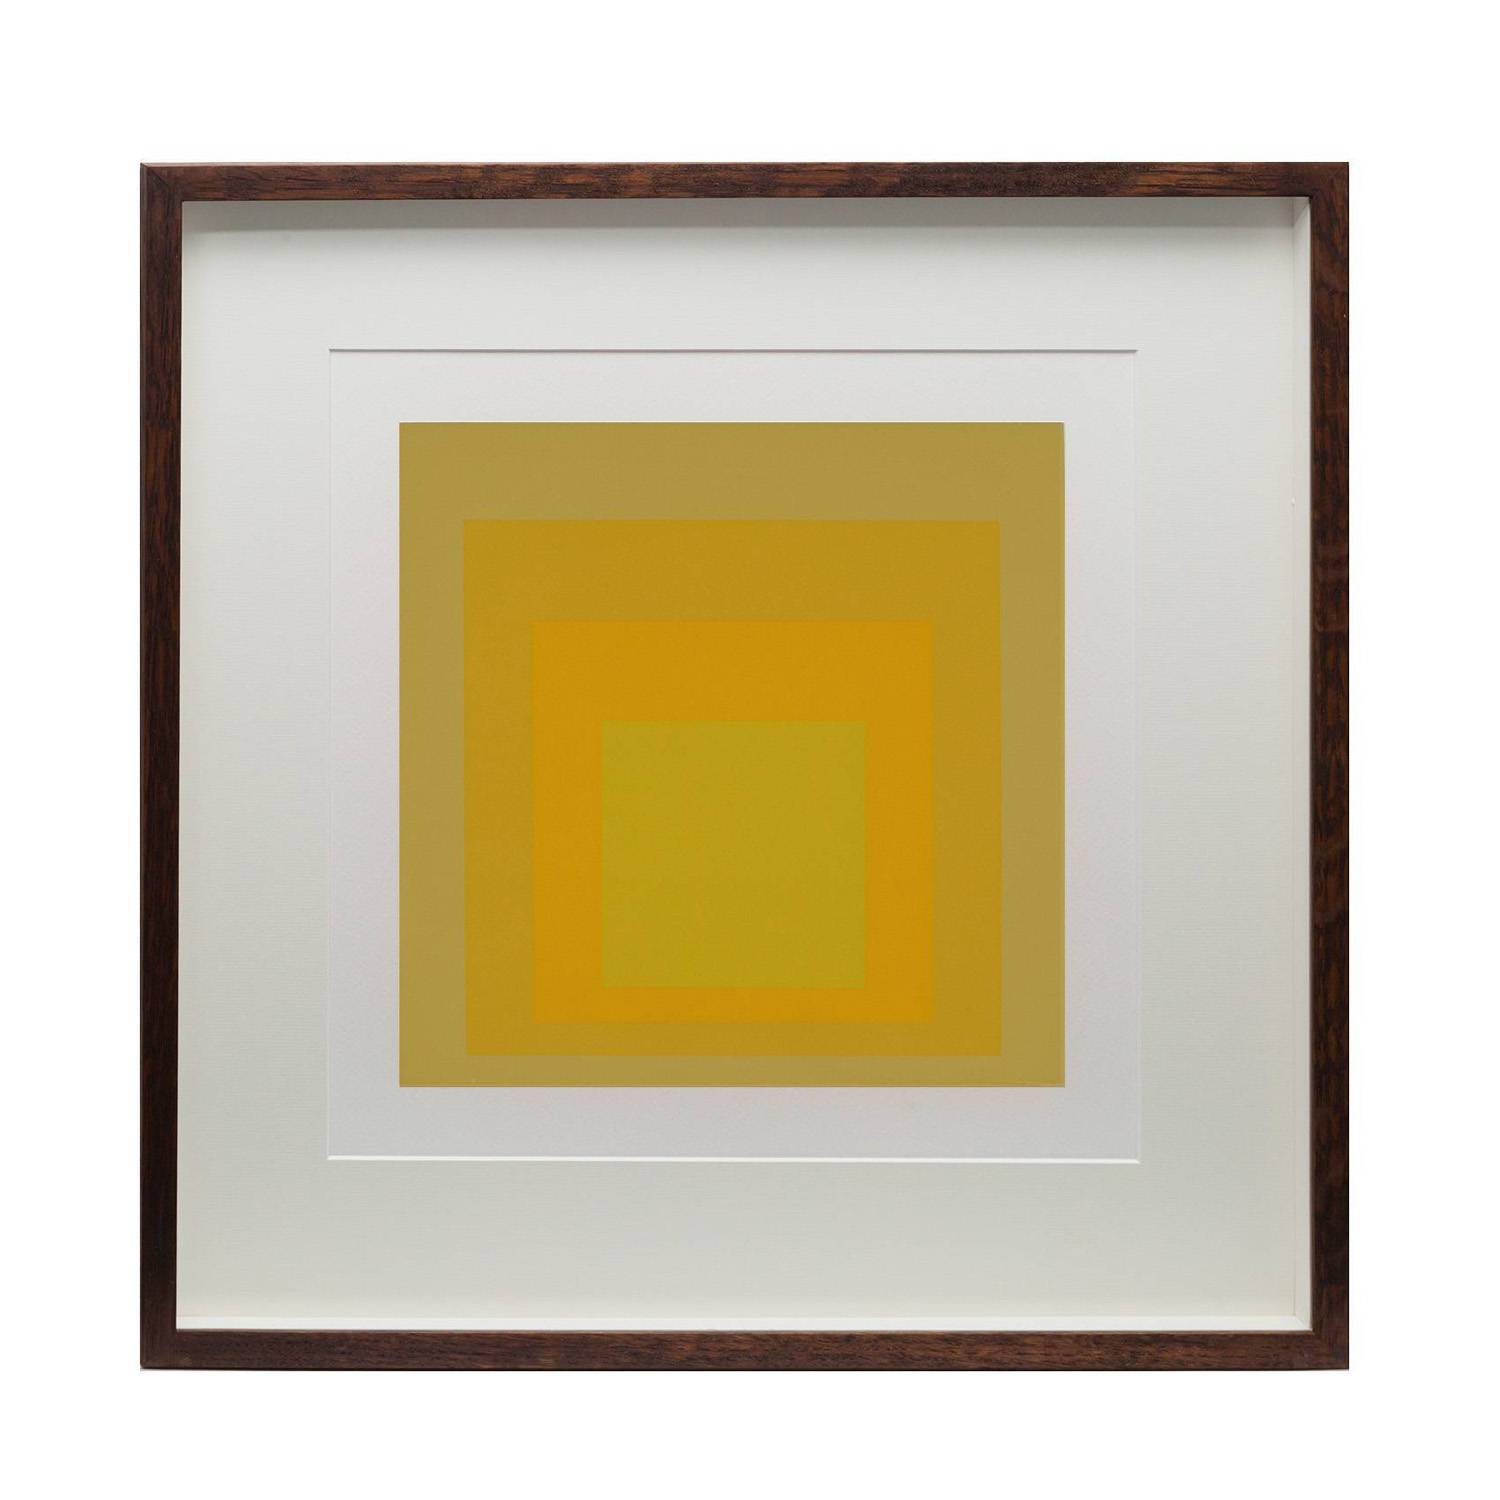 Josef Albers (1888-1976), Homage to the Square - 1966 - 00pp